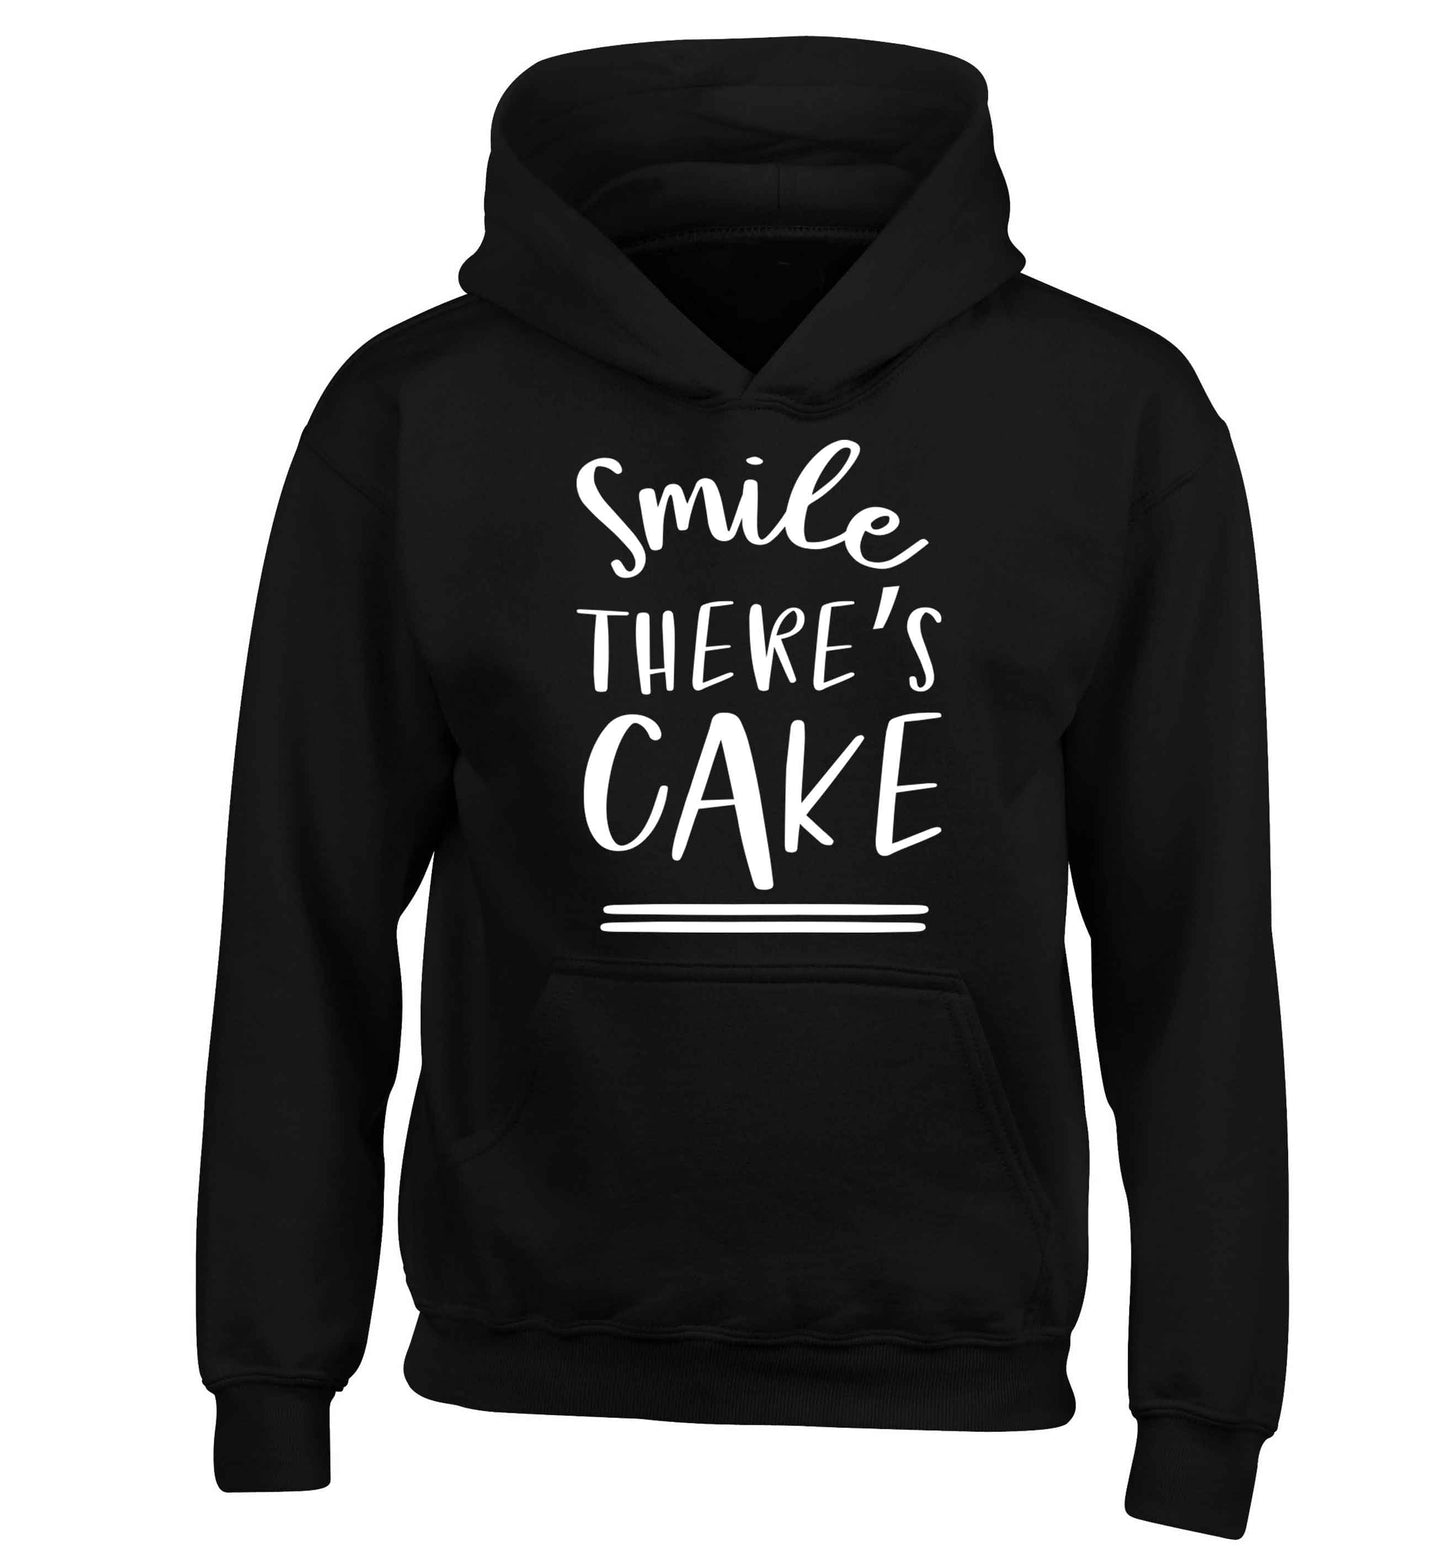 Smile there's cake children's black hoodie 12-13 Years